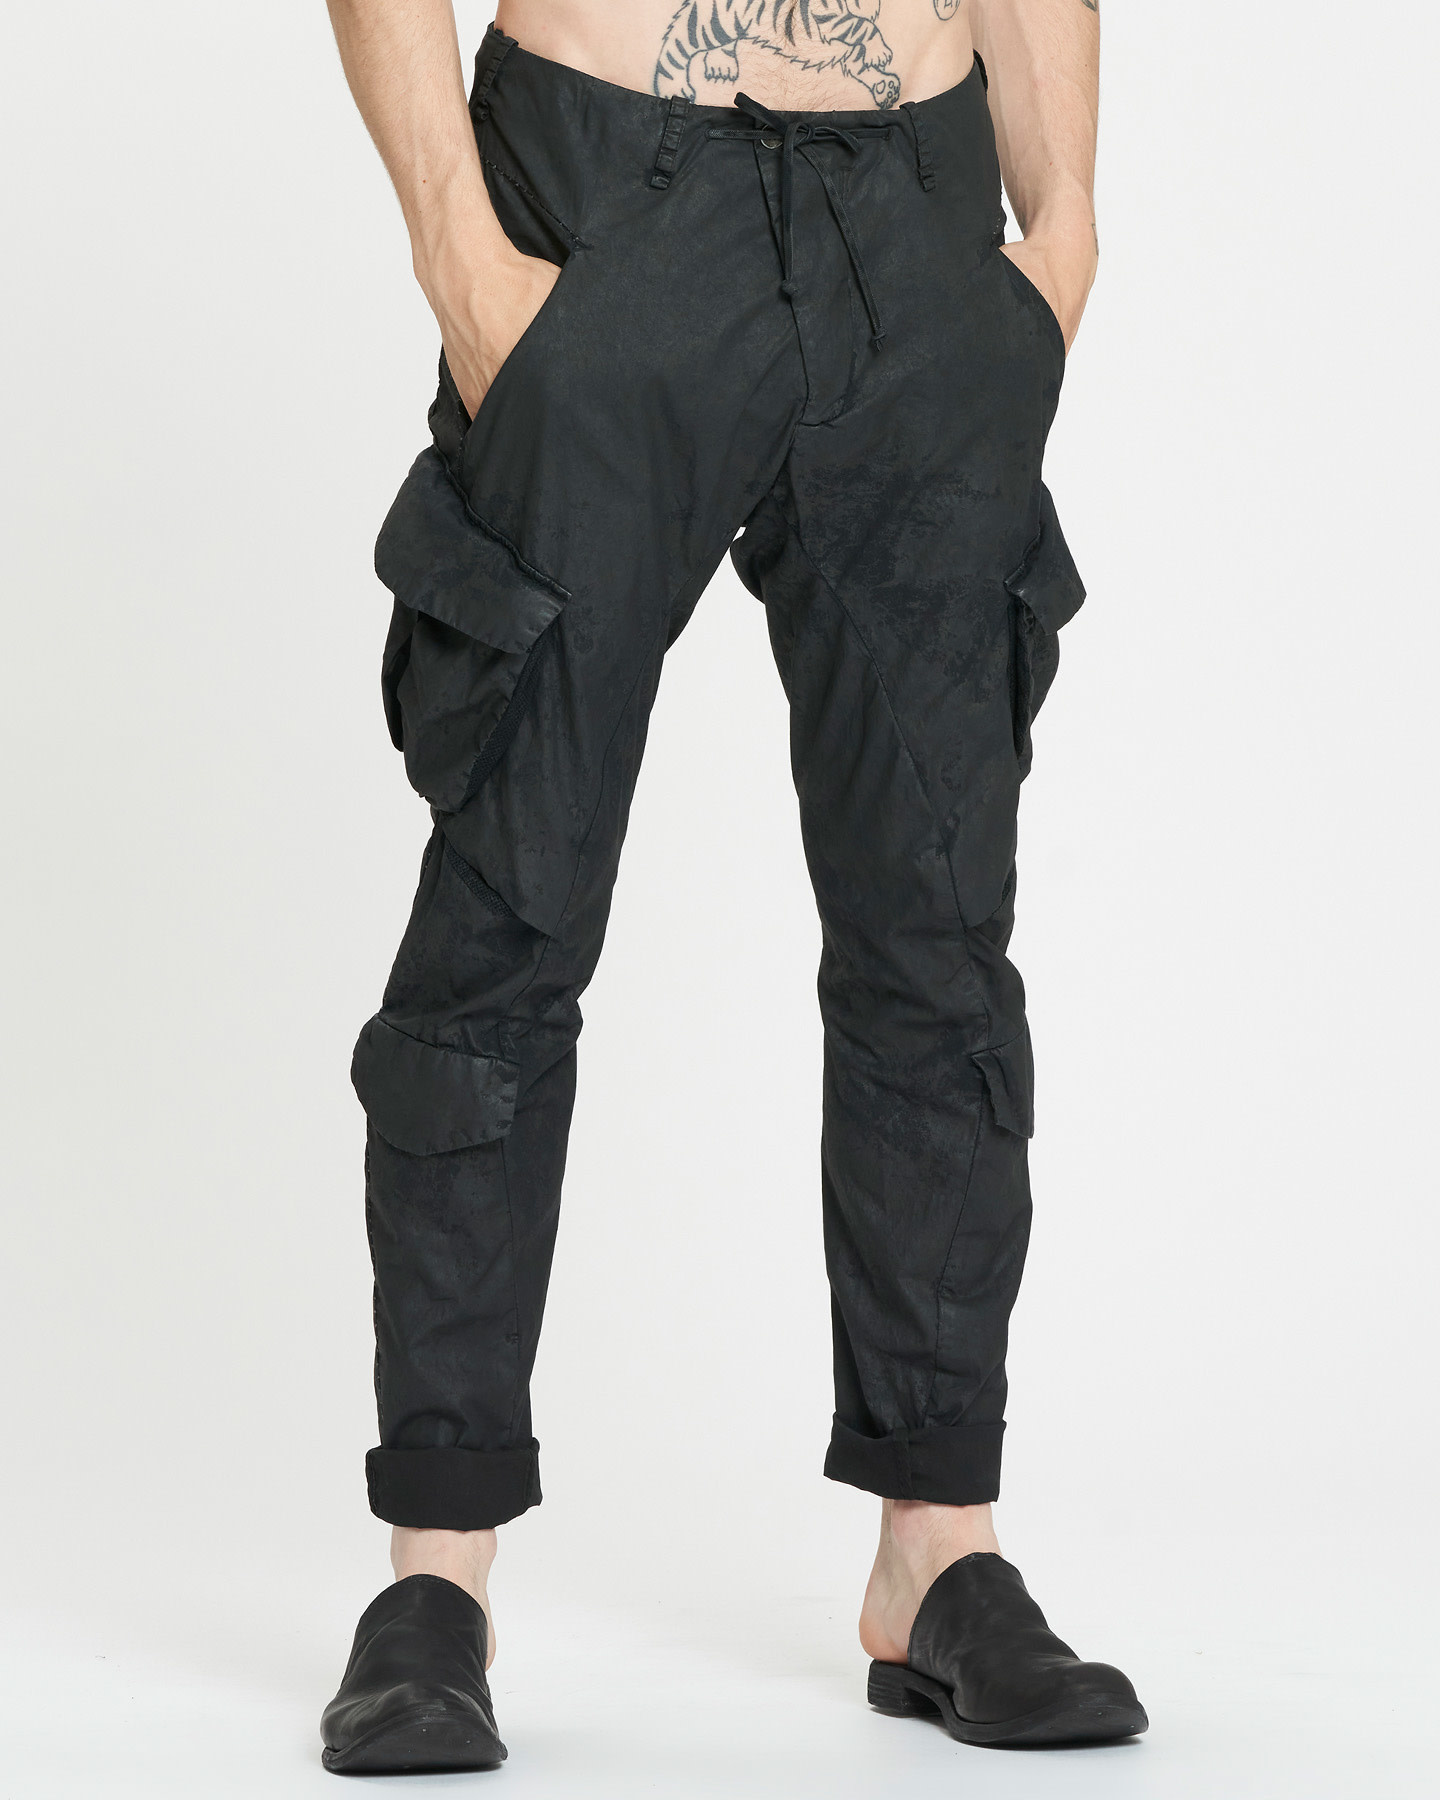 VENTILATED BAGGY COMBAT PANTS - SMEARED